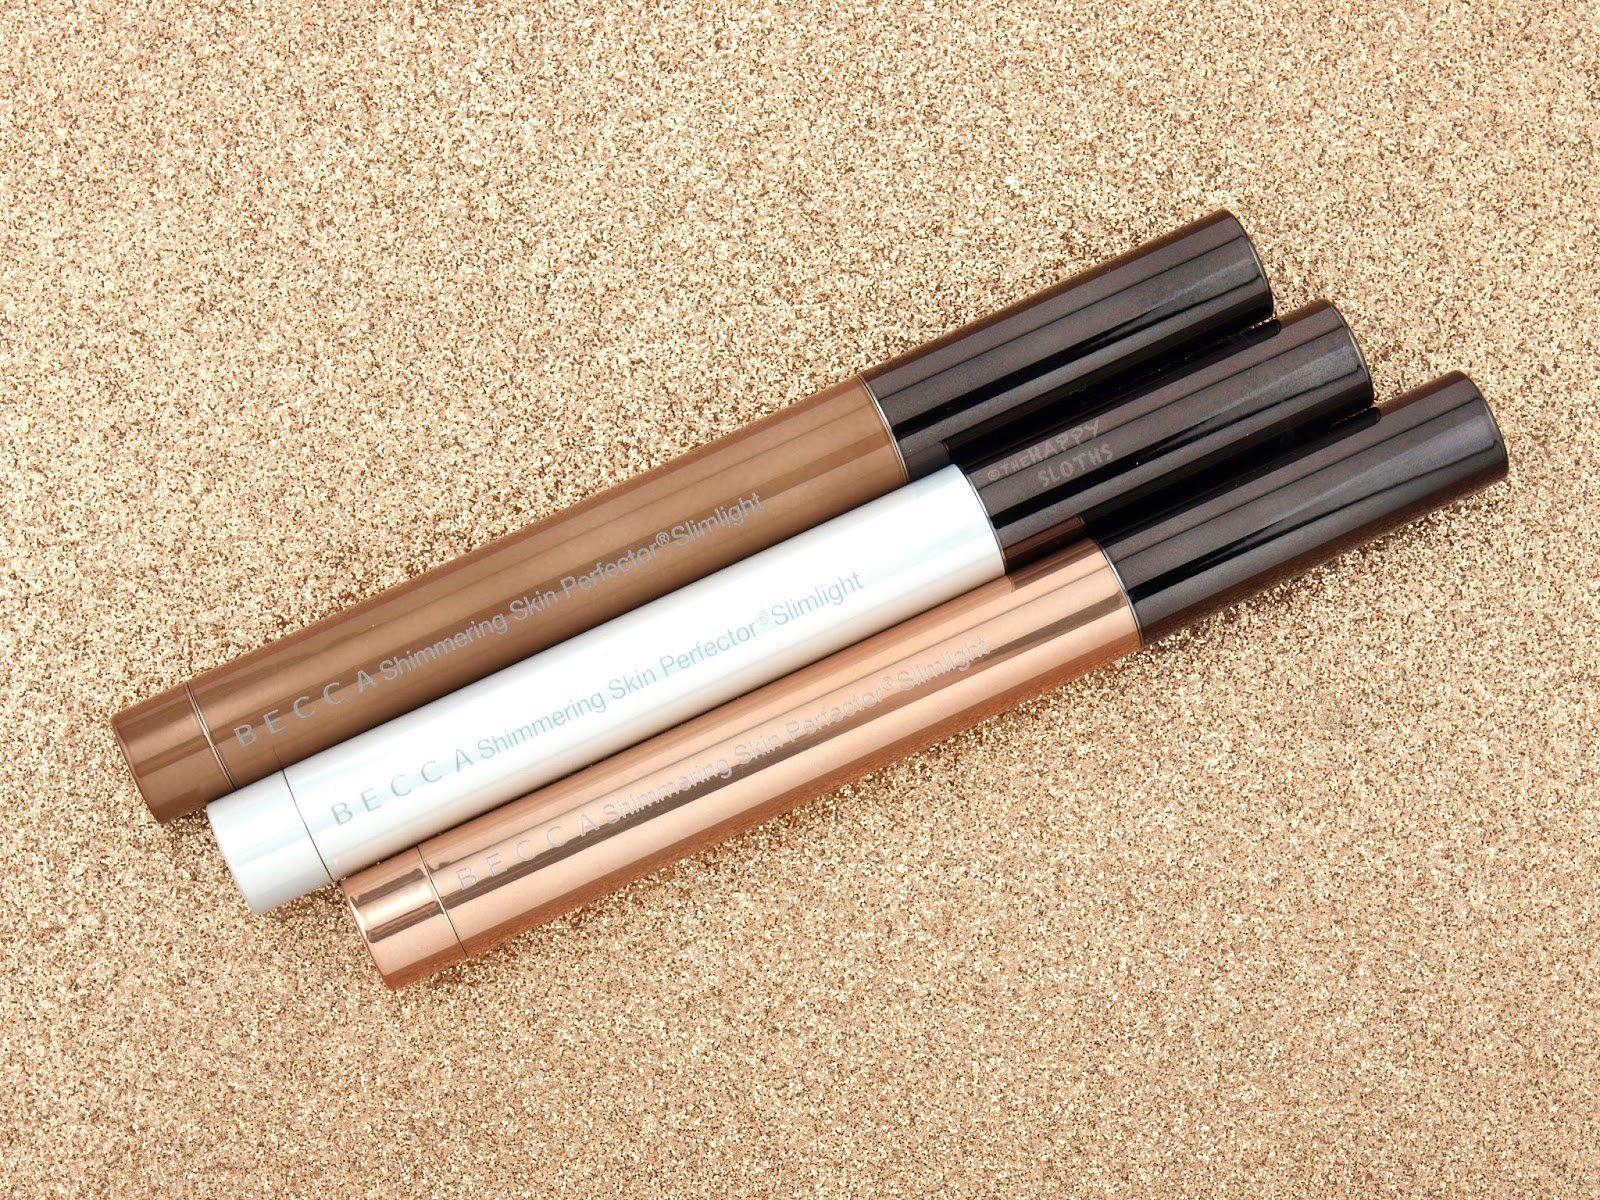 BECCA Shimmering Skin Perfector Slimlight Review and Swatches